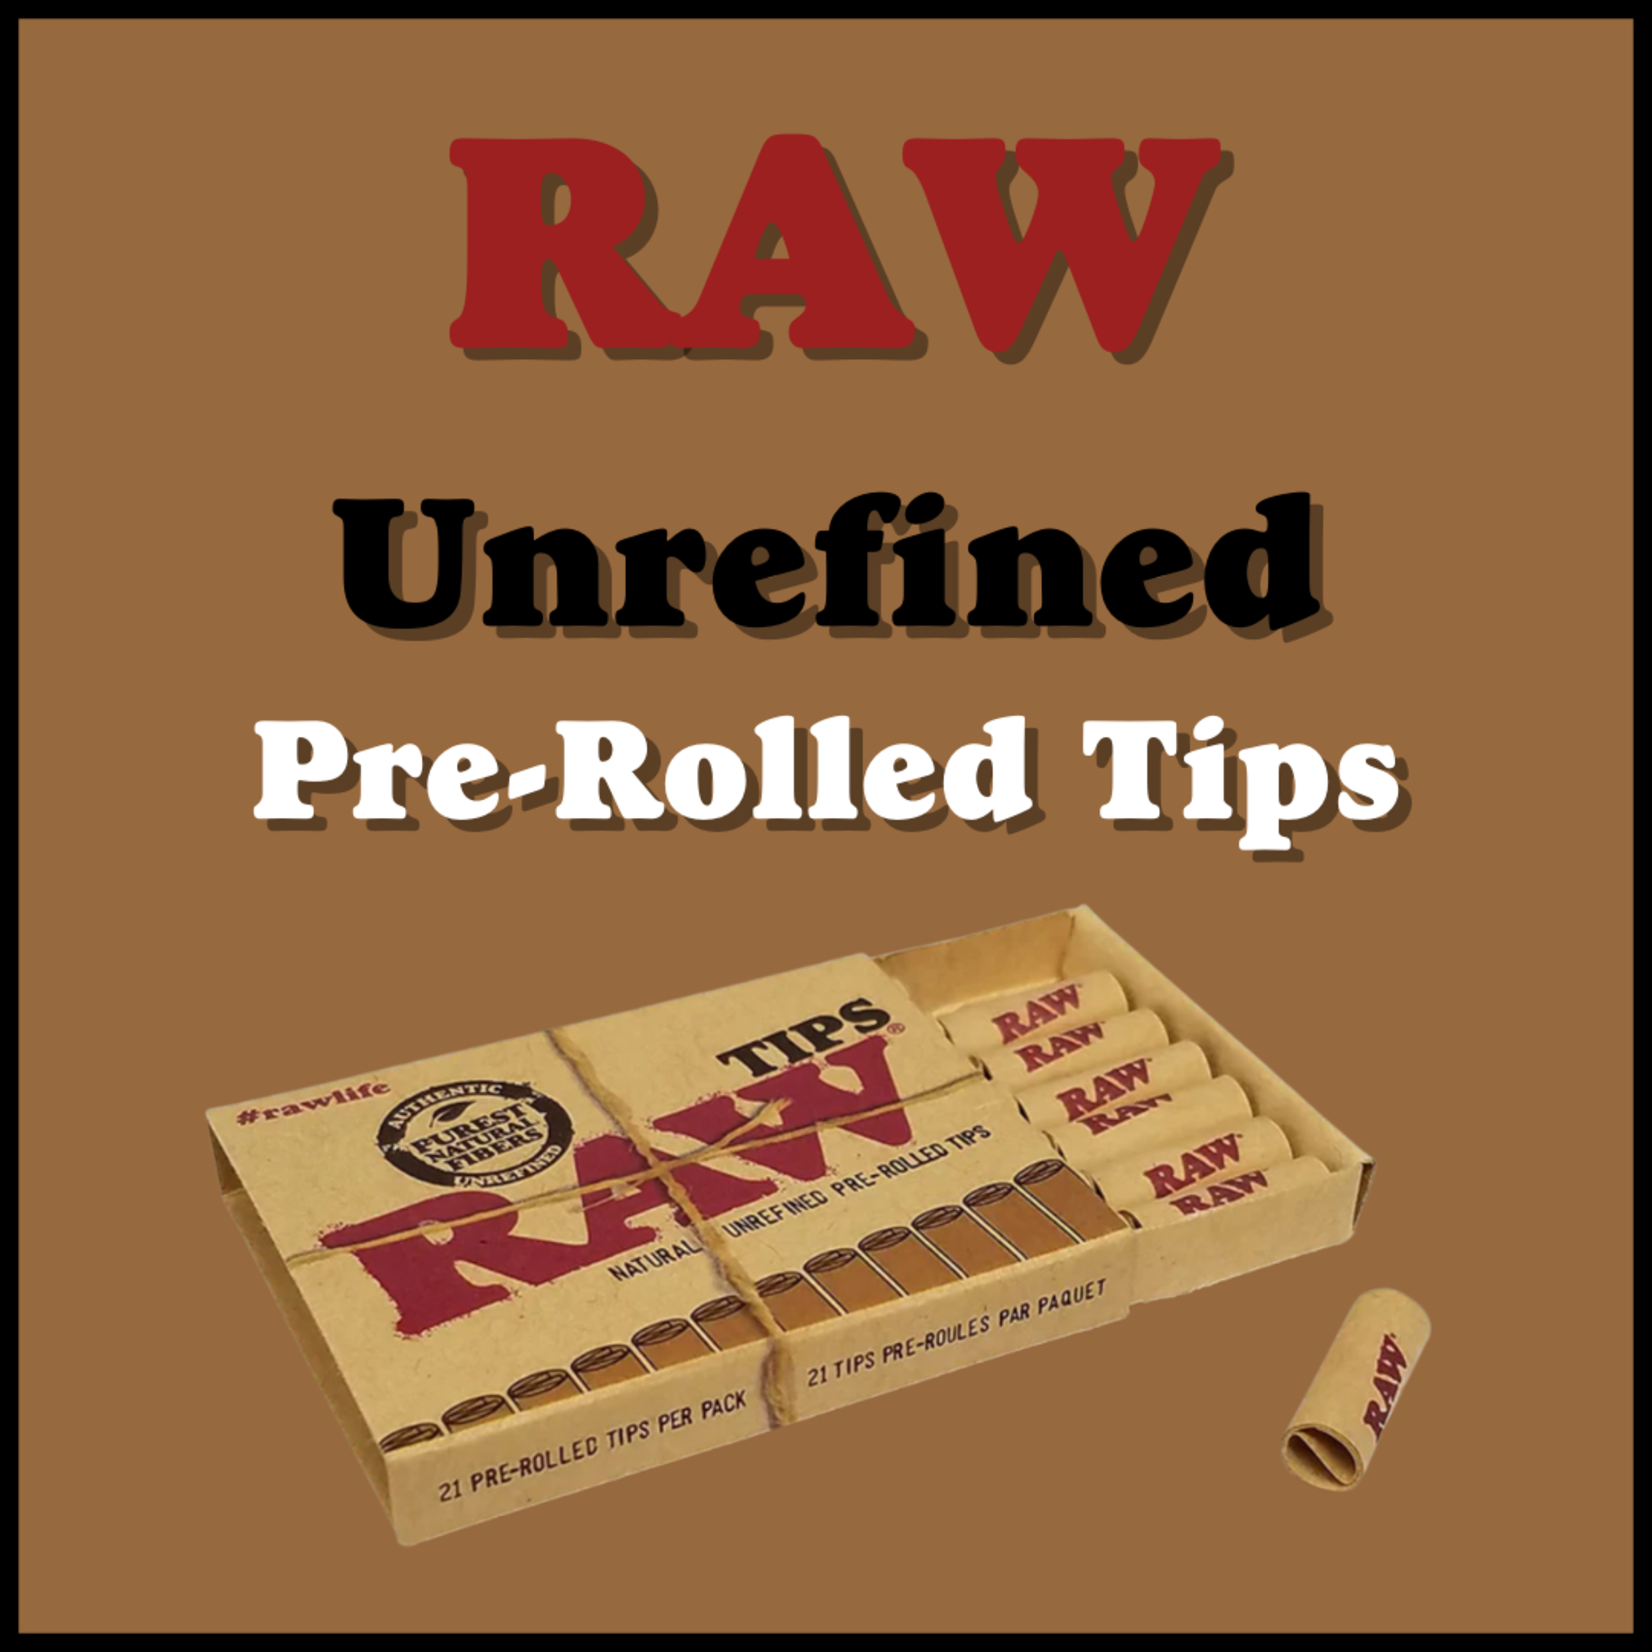 RAW RAW Tips: Natural Unrefined Pre-Rolled Tips - 21 per Pack